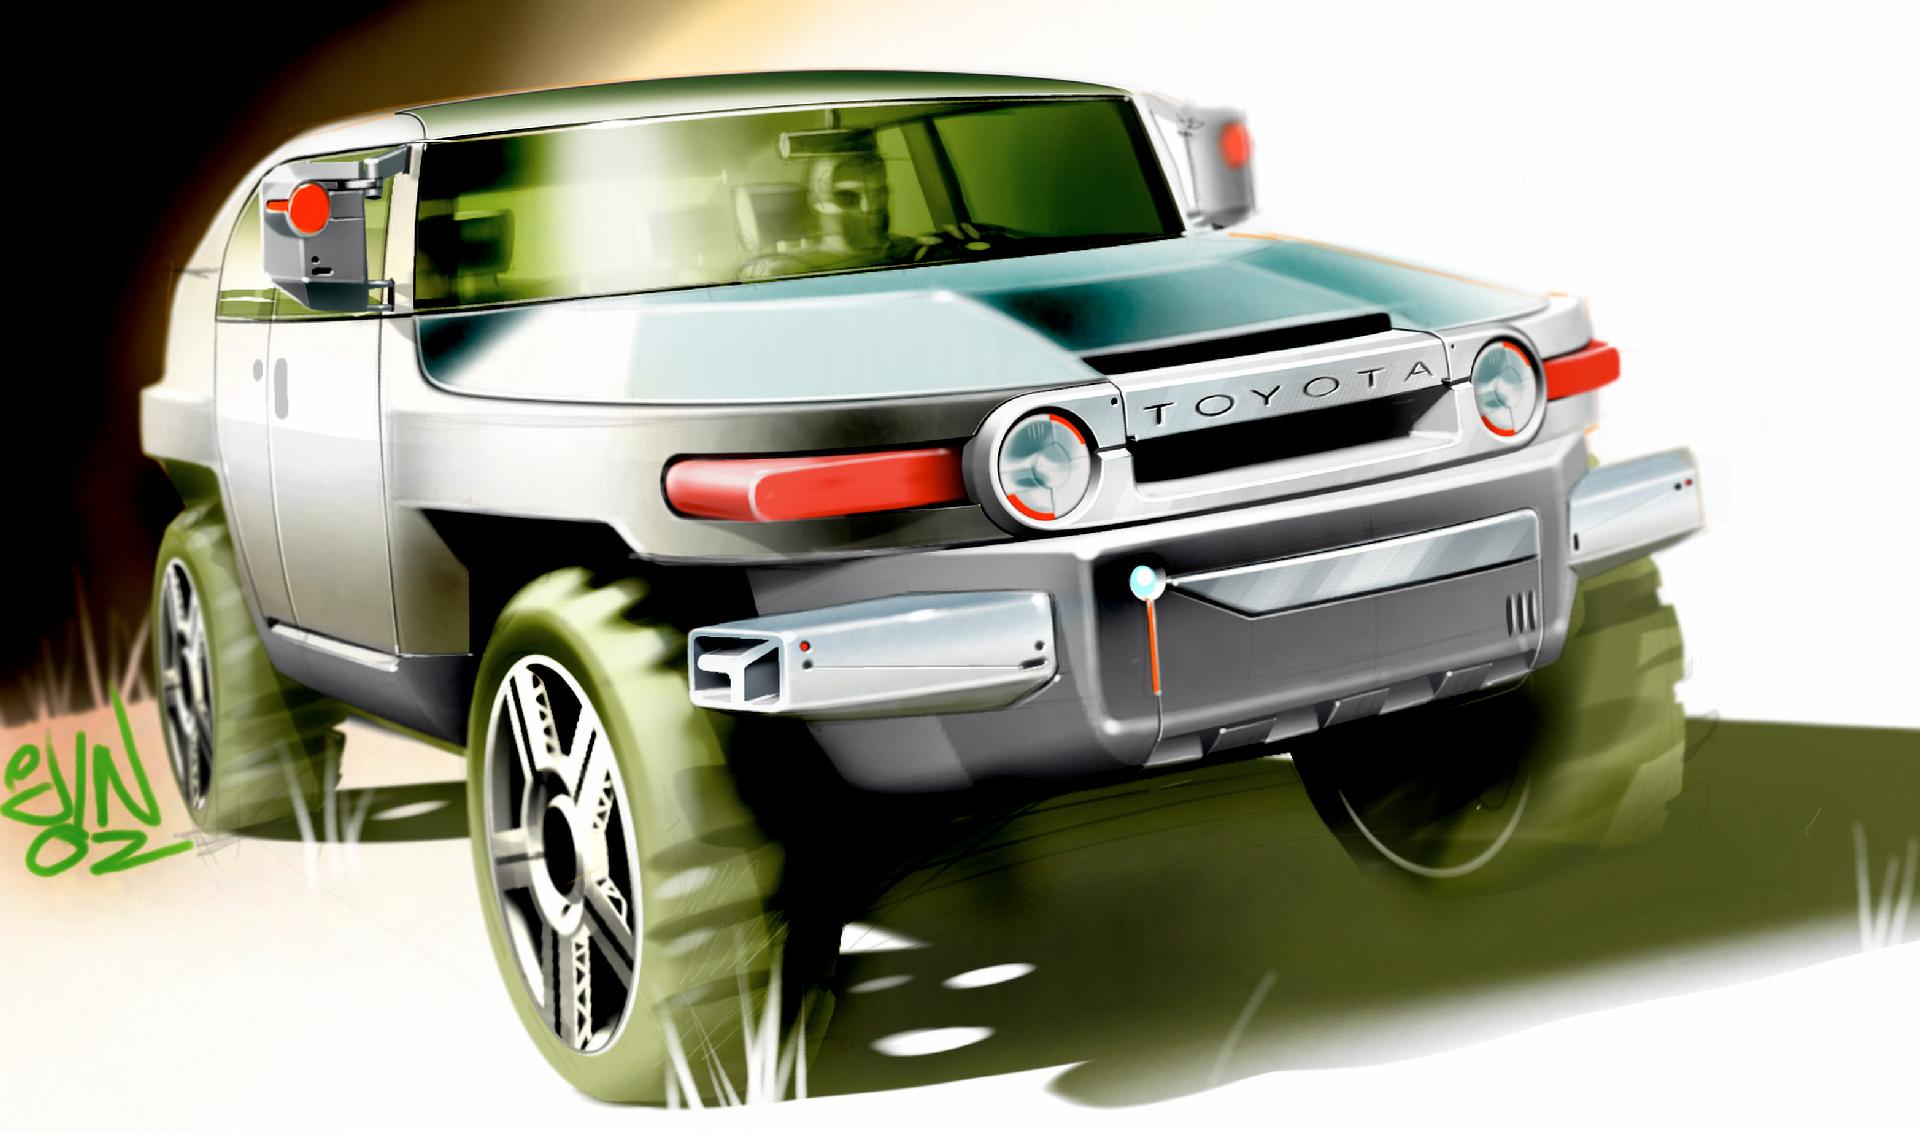 Toyota FJ Cruiser (unveiled as concept at the North American International Auto Show in 2003)